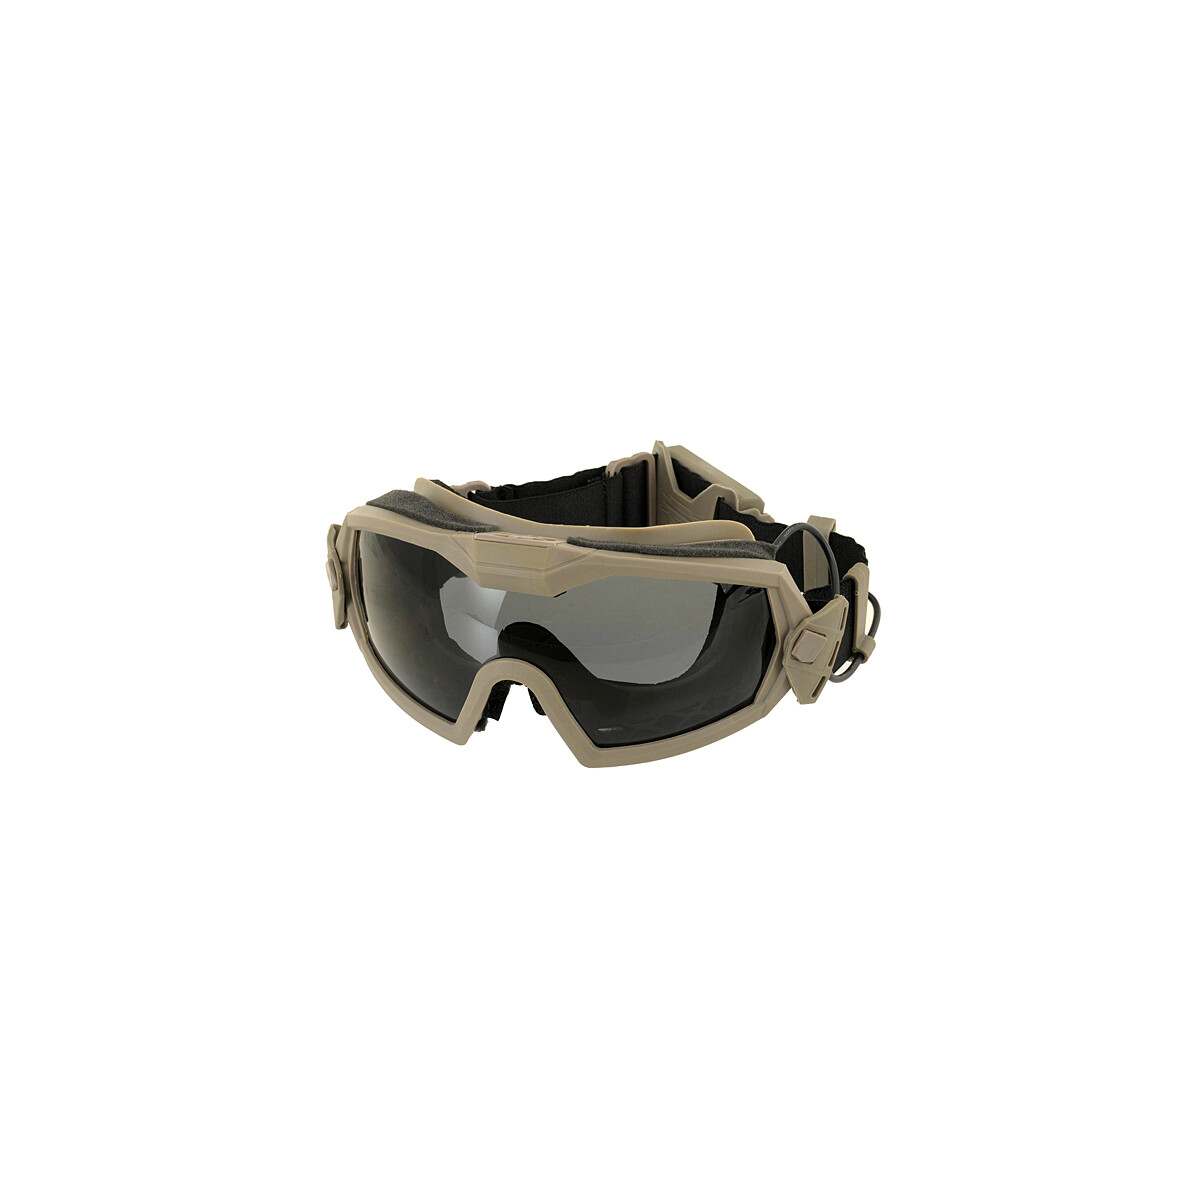 Protective goggle mod.2 with Built-In Anti-Fog Fan - Dark...